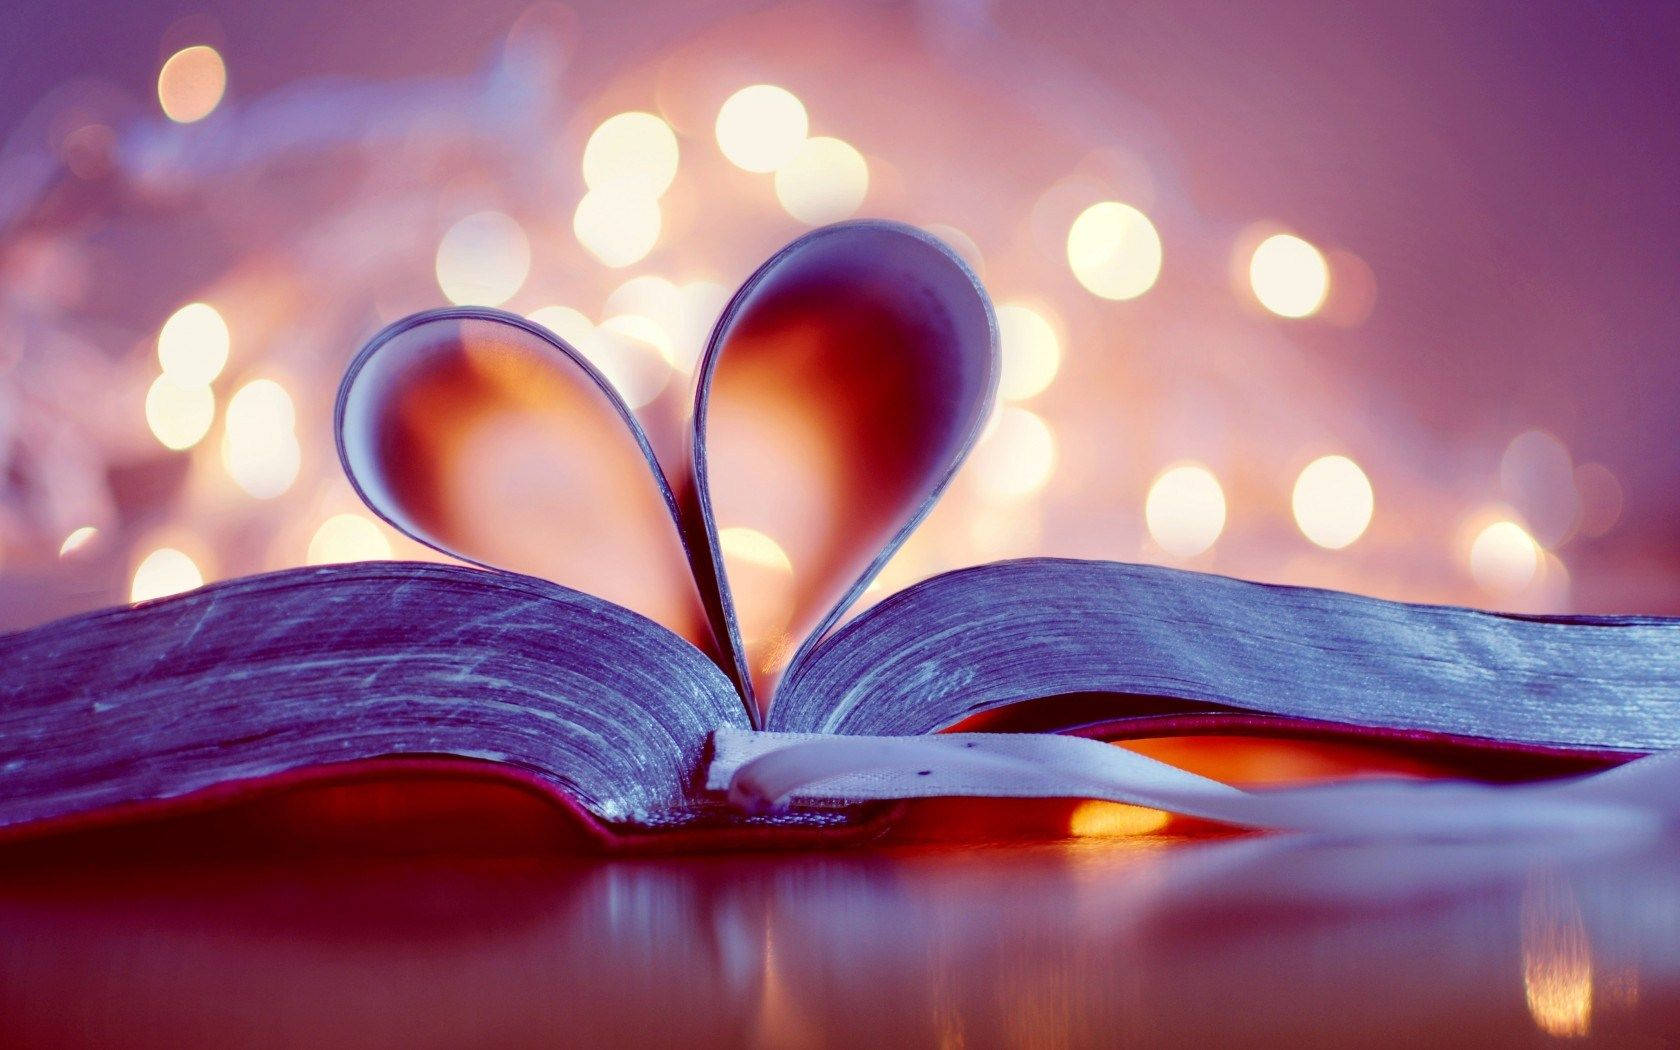 Book Of Love With Heart